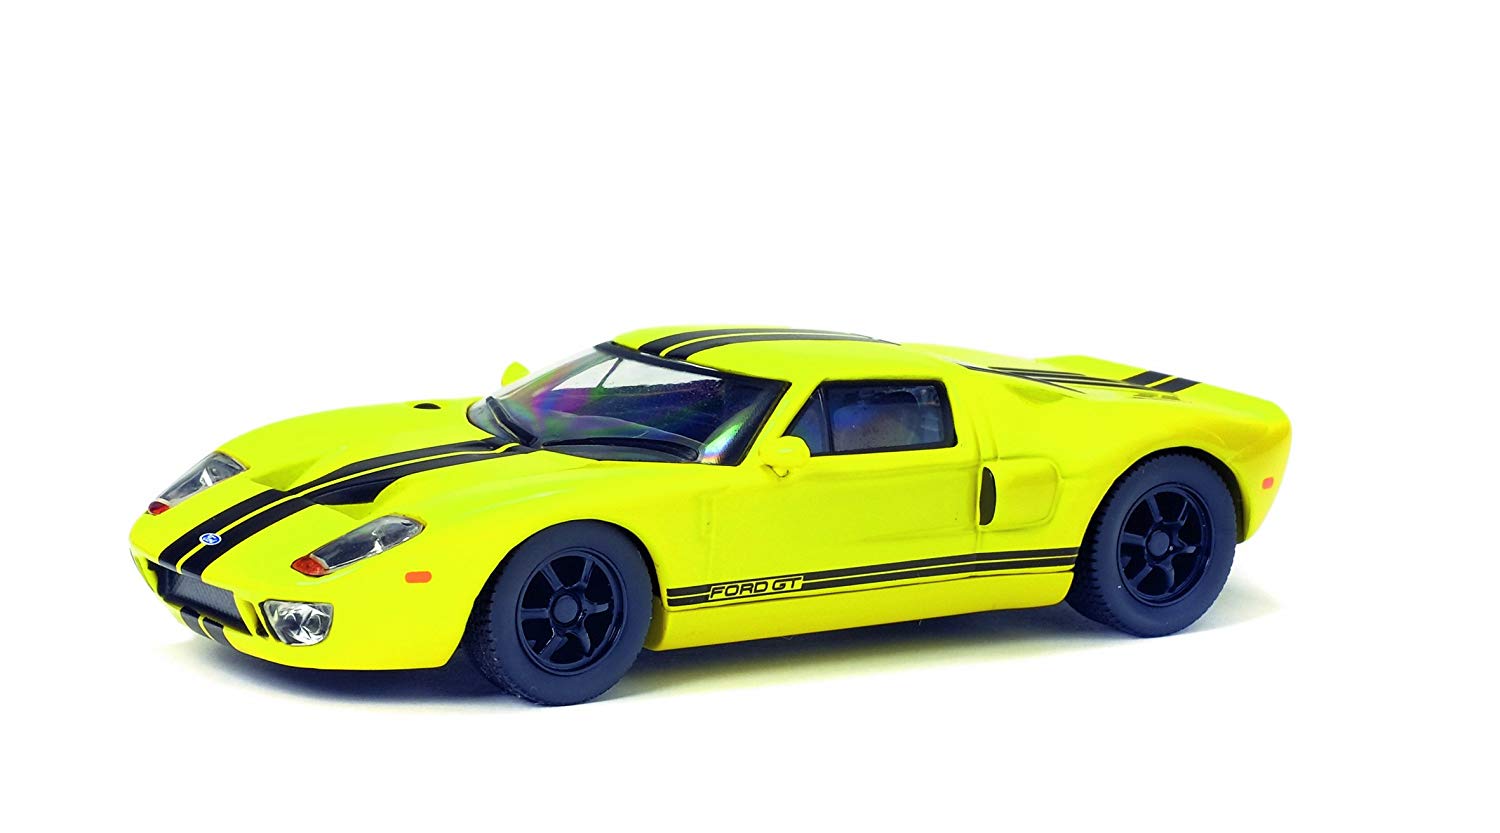 2008 Ford Gt40 [Solido 421436210], Yellow, 1:43 Die Cast